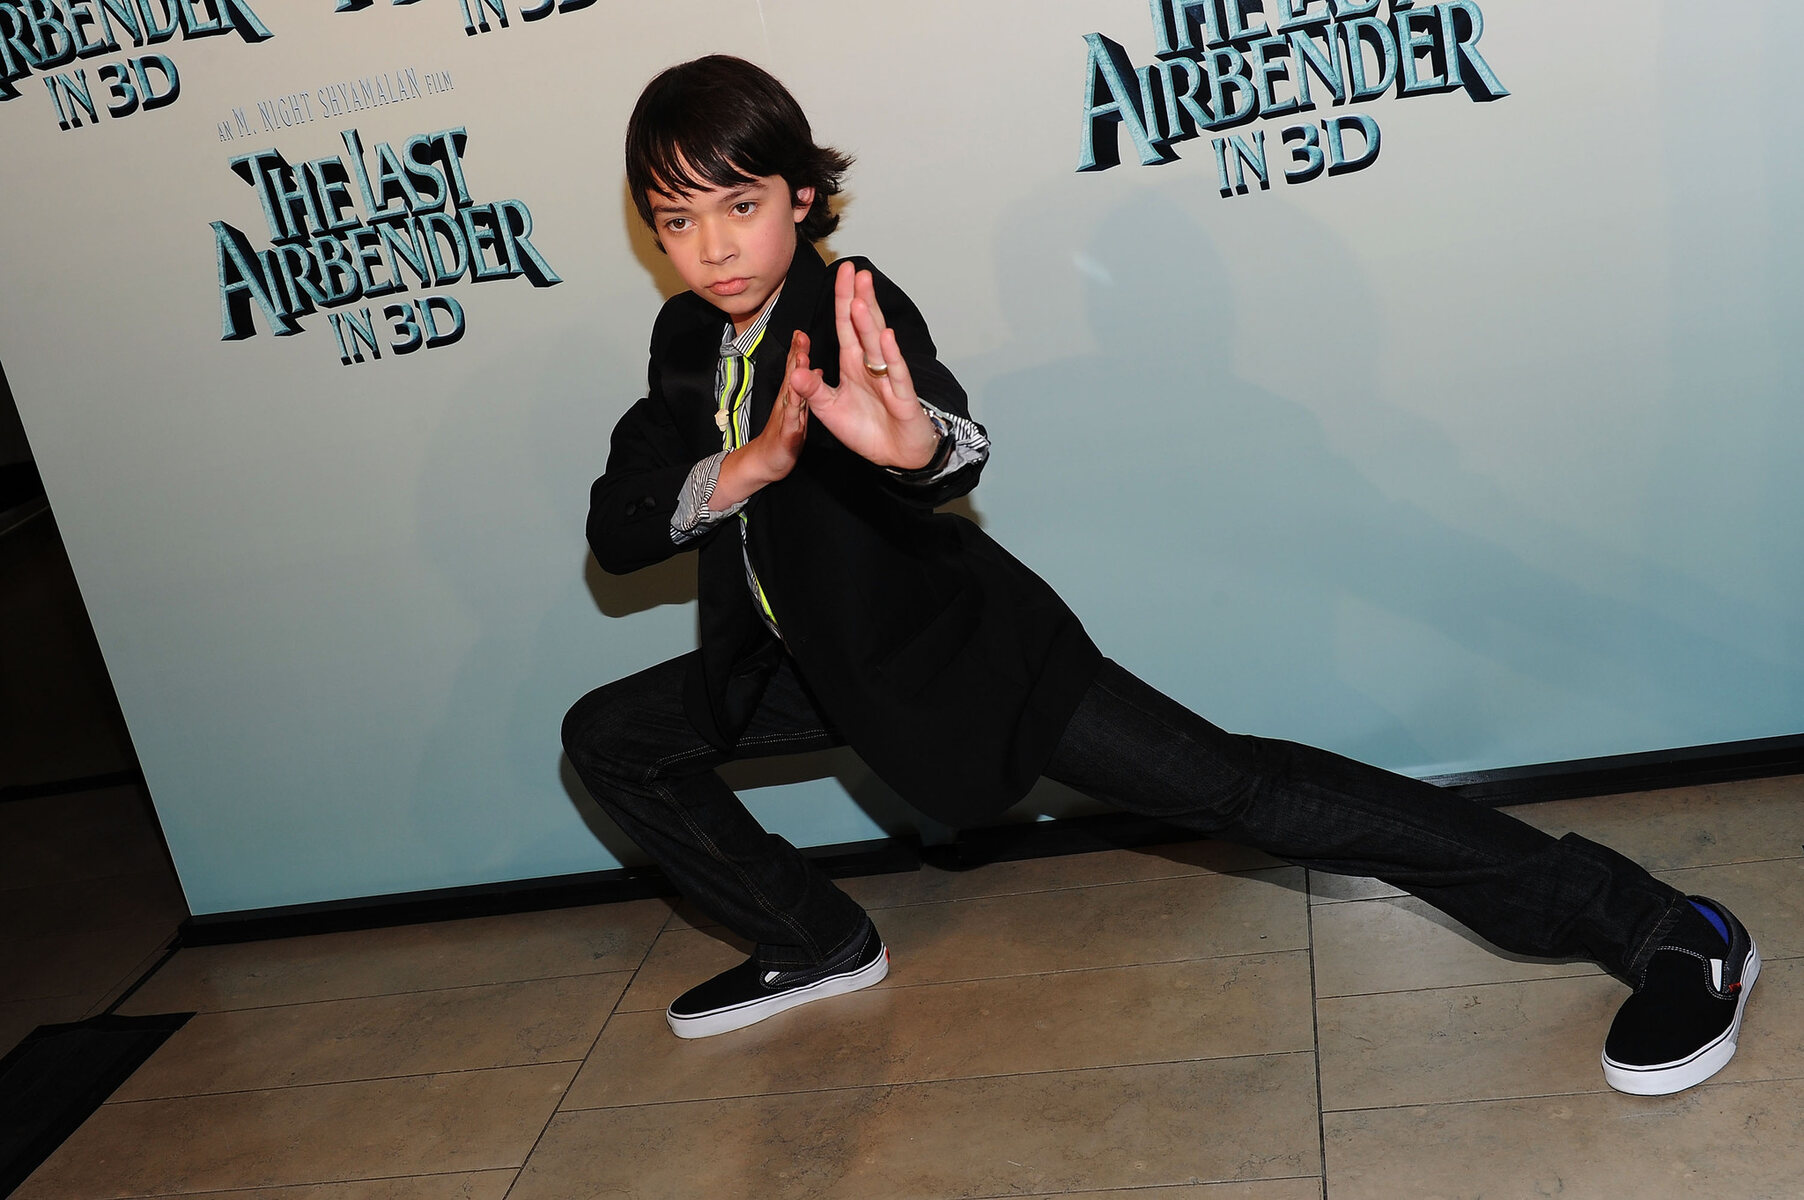 14 Extraordinary Facts About Noah Ringer